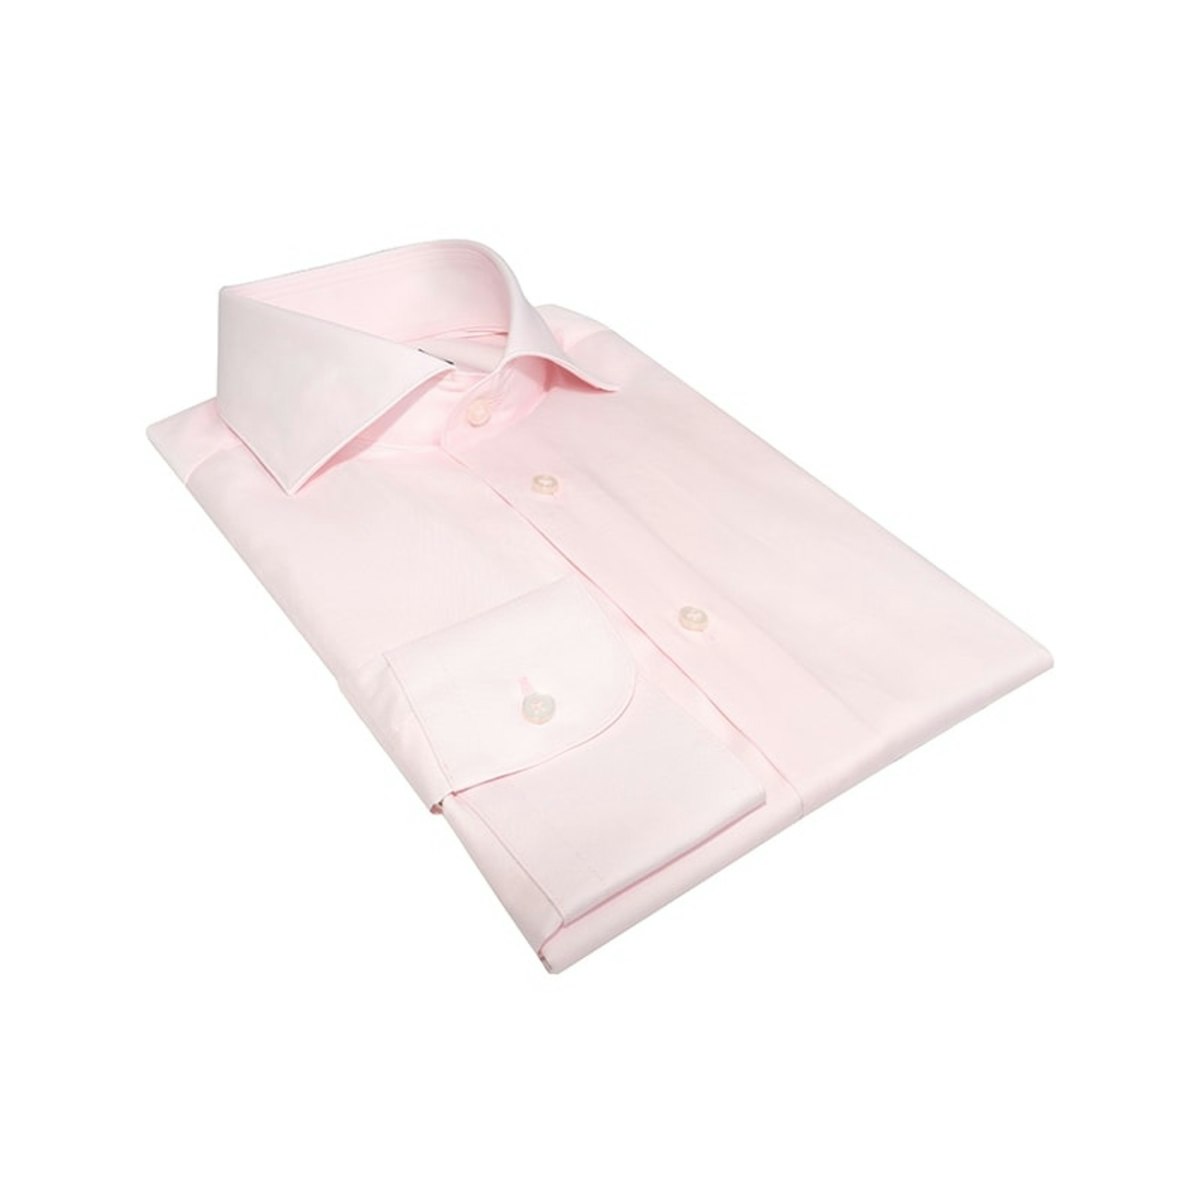 InStitchu Collection The Snapper Pink Shirt